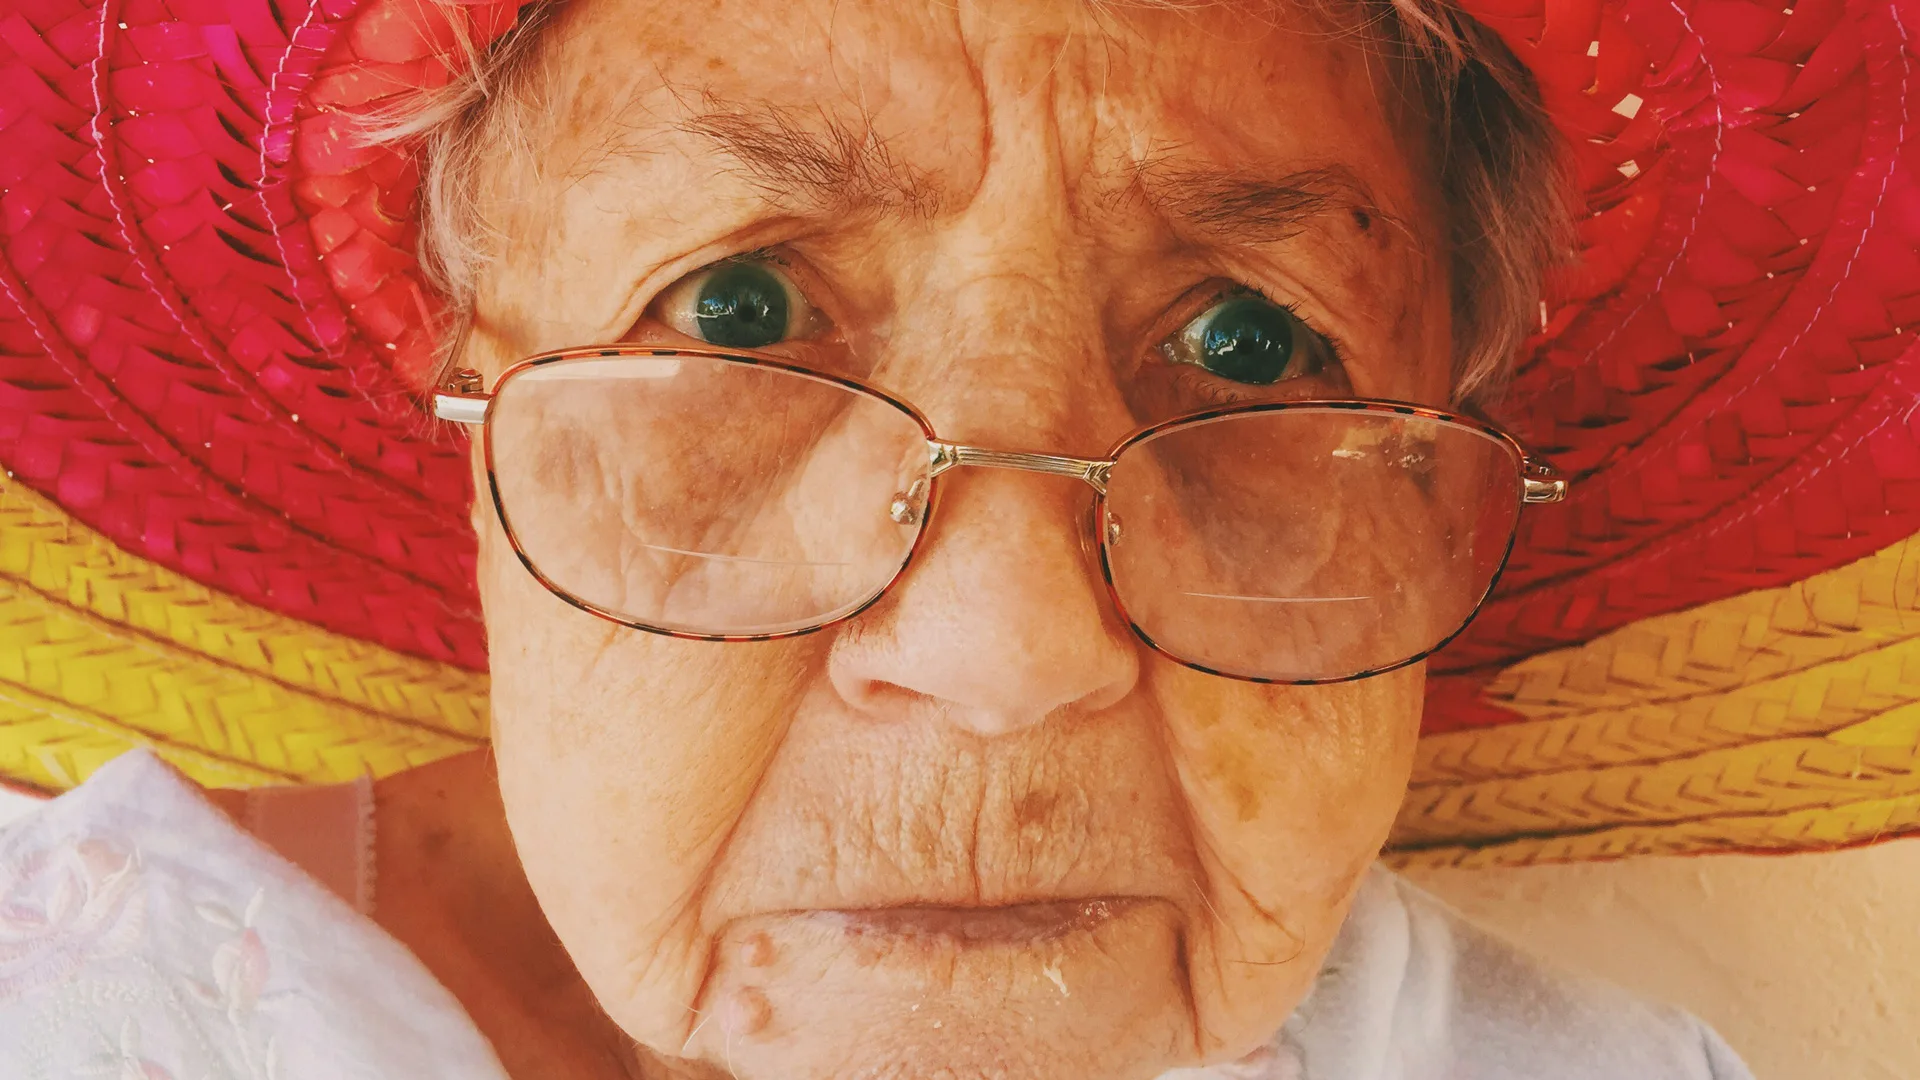 An old woman with glasses and hat looking directly at the camera, very sternly